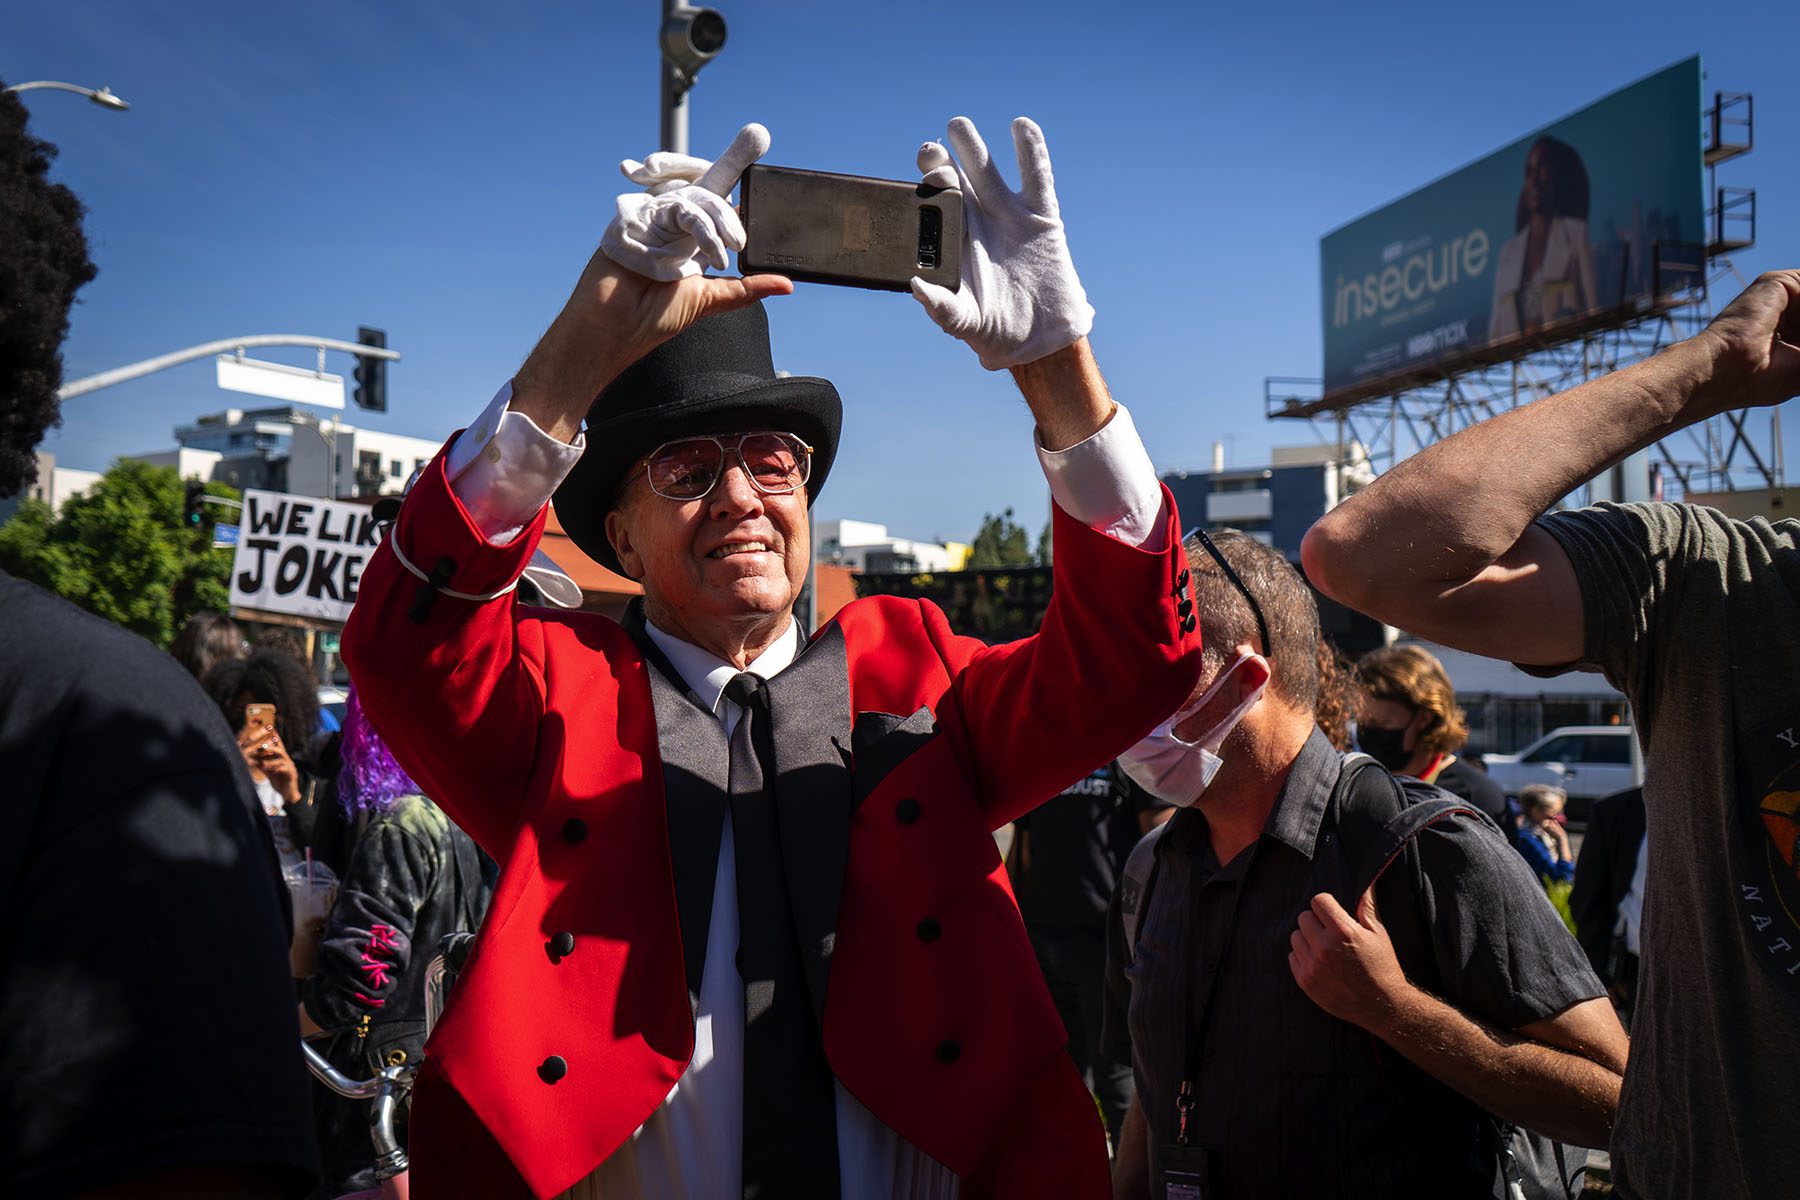 A participant wearing a red suit, a top hat and white gloves takes a photo on their phone.